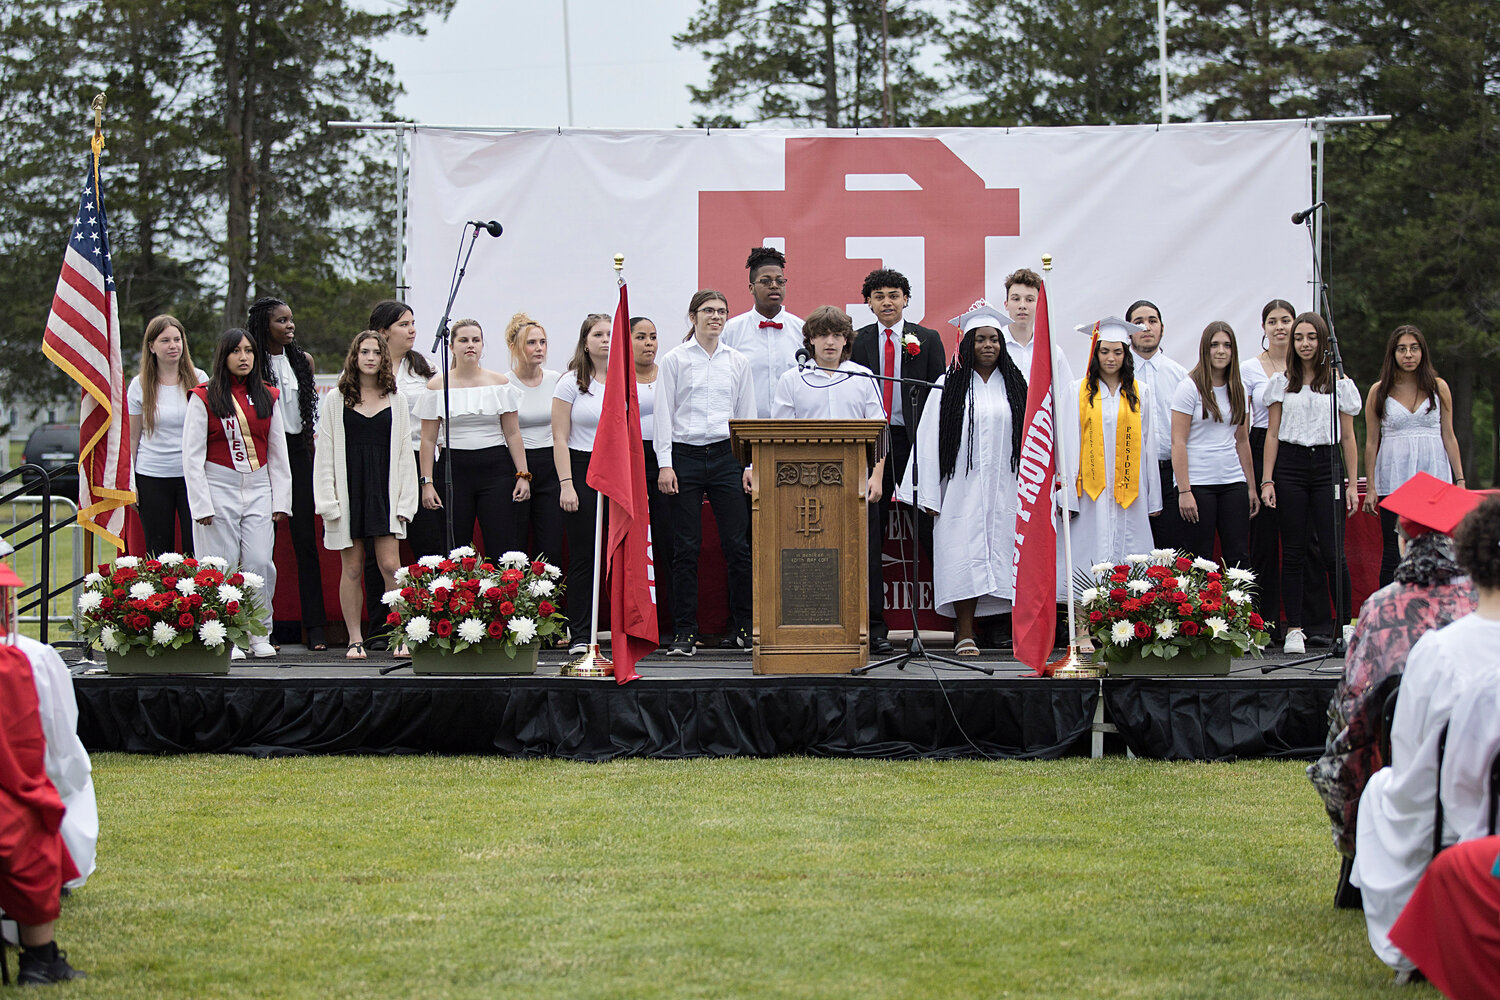 The Select Chorus performs during the event.